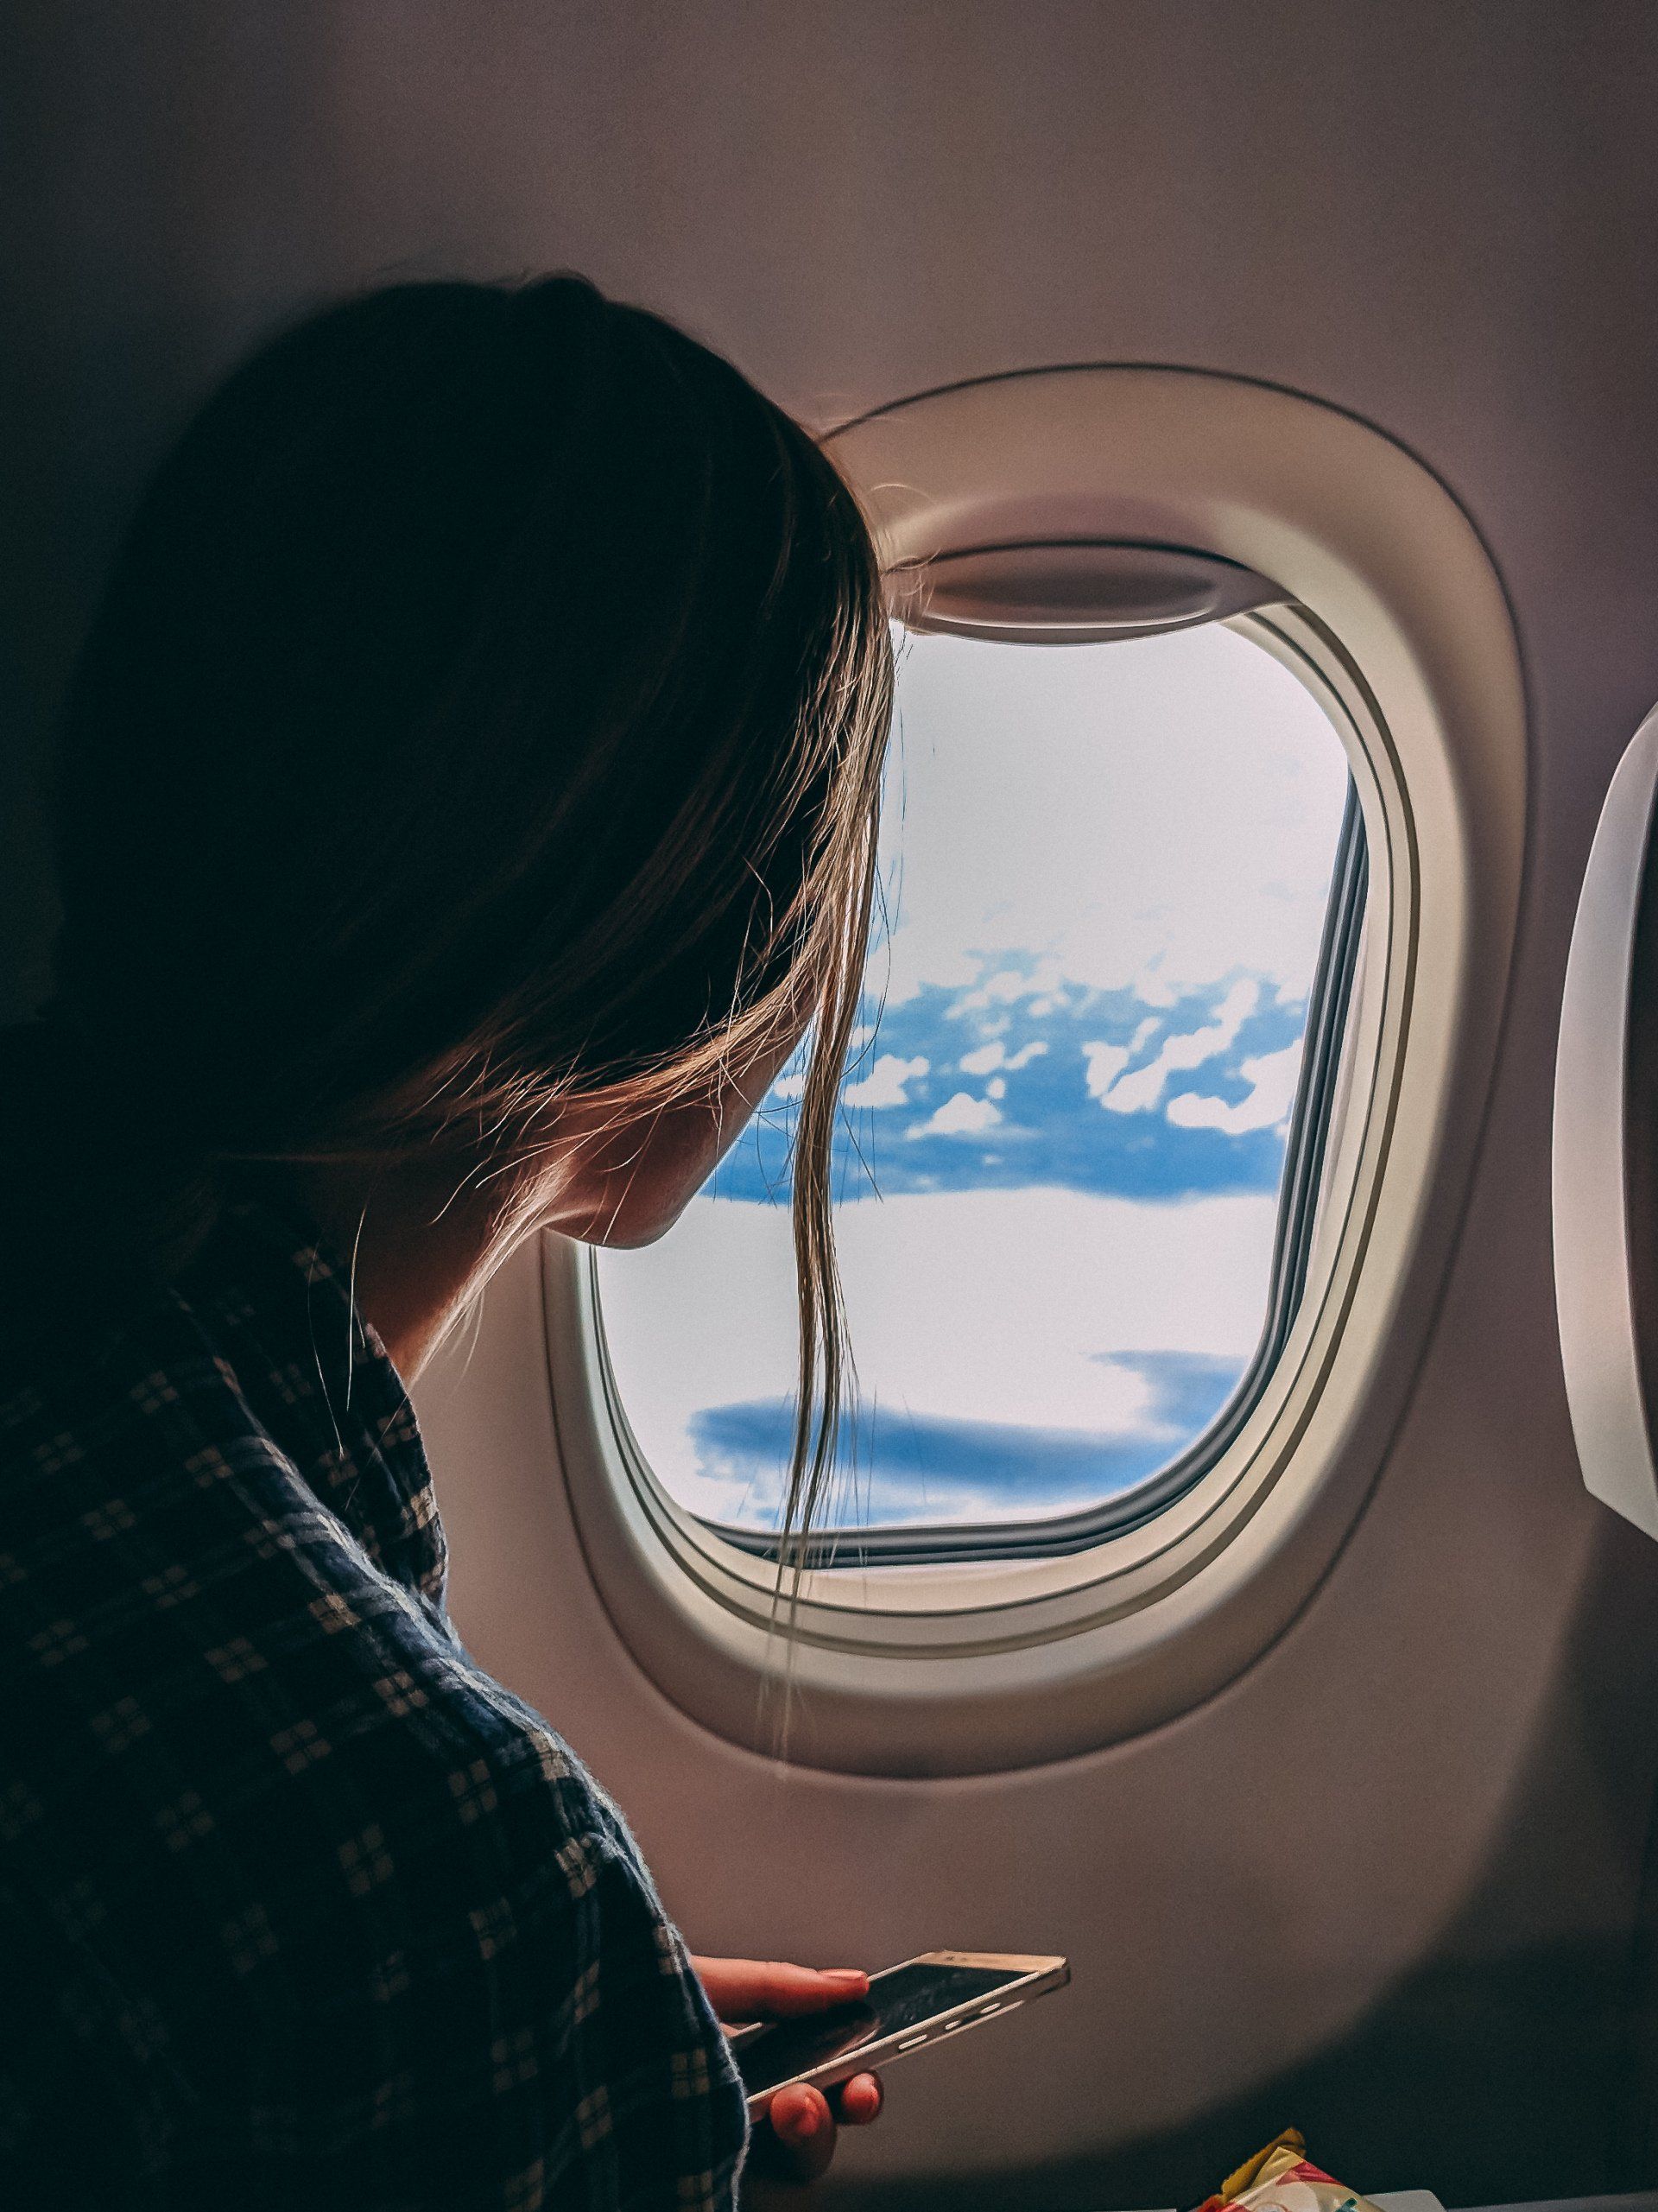 Woman Looking to the Sky Through an Airplane Window - USA and Canada Holidays Barter's Travelnet